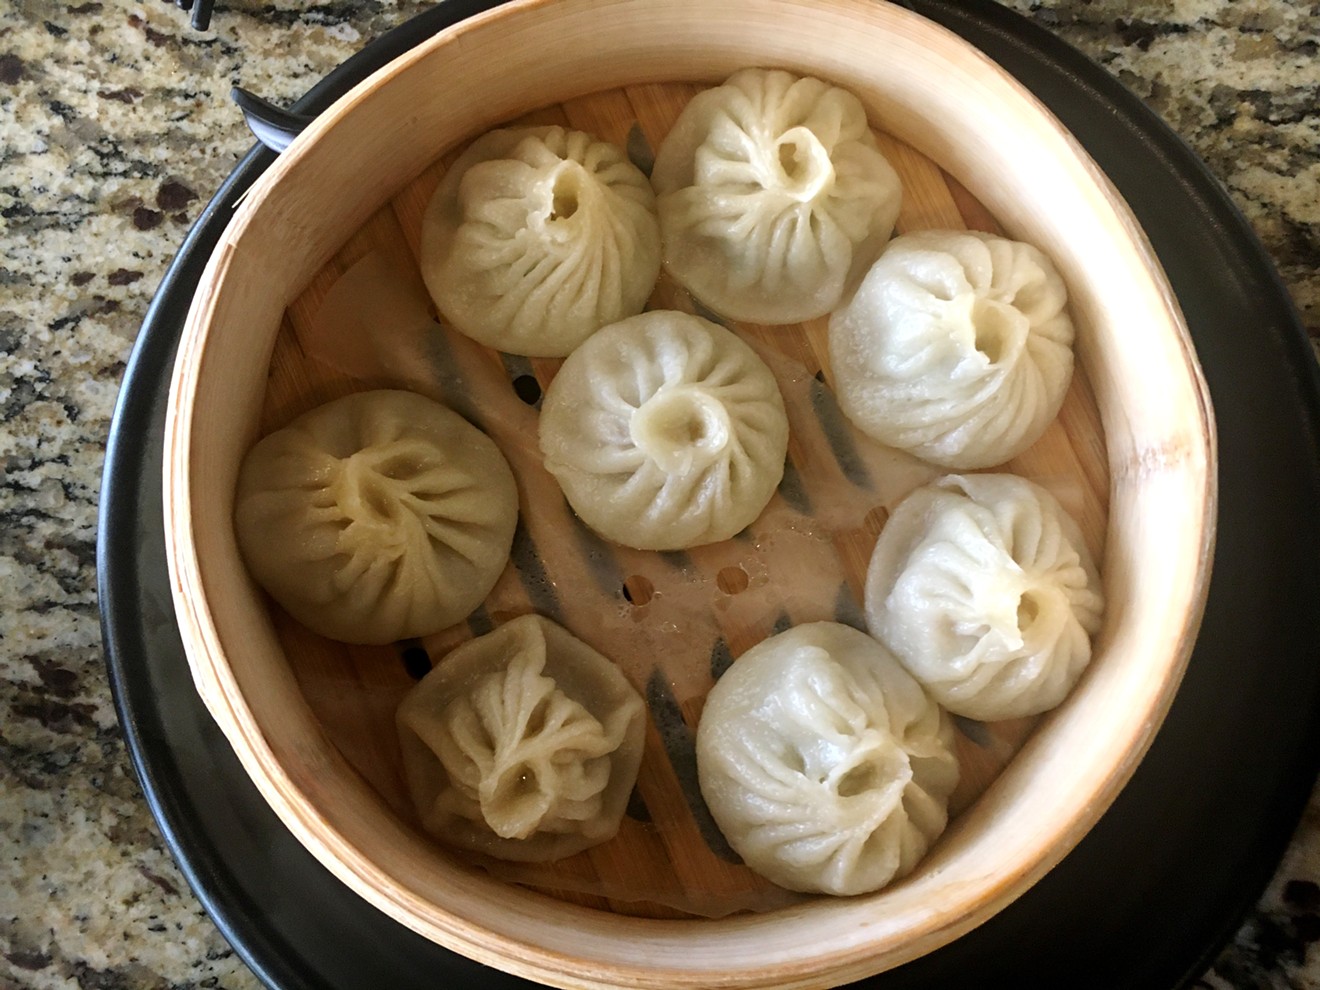 The delicate pleats are a sign that these xiaolongbao are handmade.